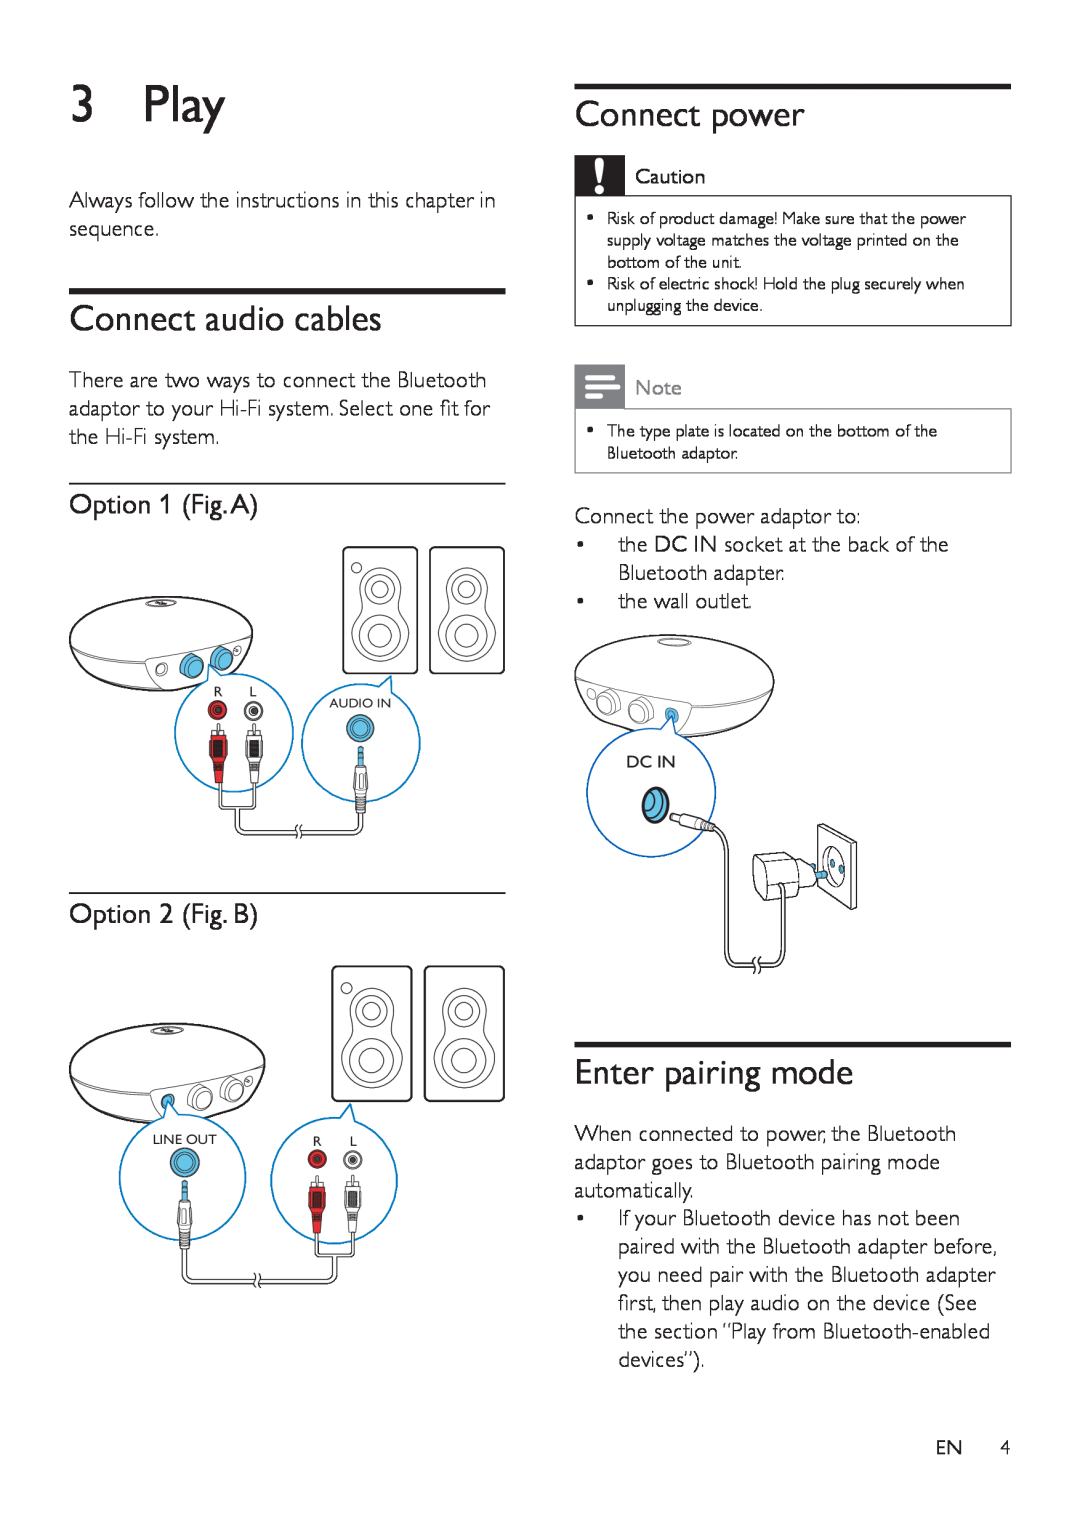 Philips AEA2000 user manual Play, Connect audio cables, Connect power, Enter pairing mode, Option 1 Fig.A, Option 2 Fig. B 